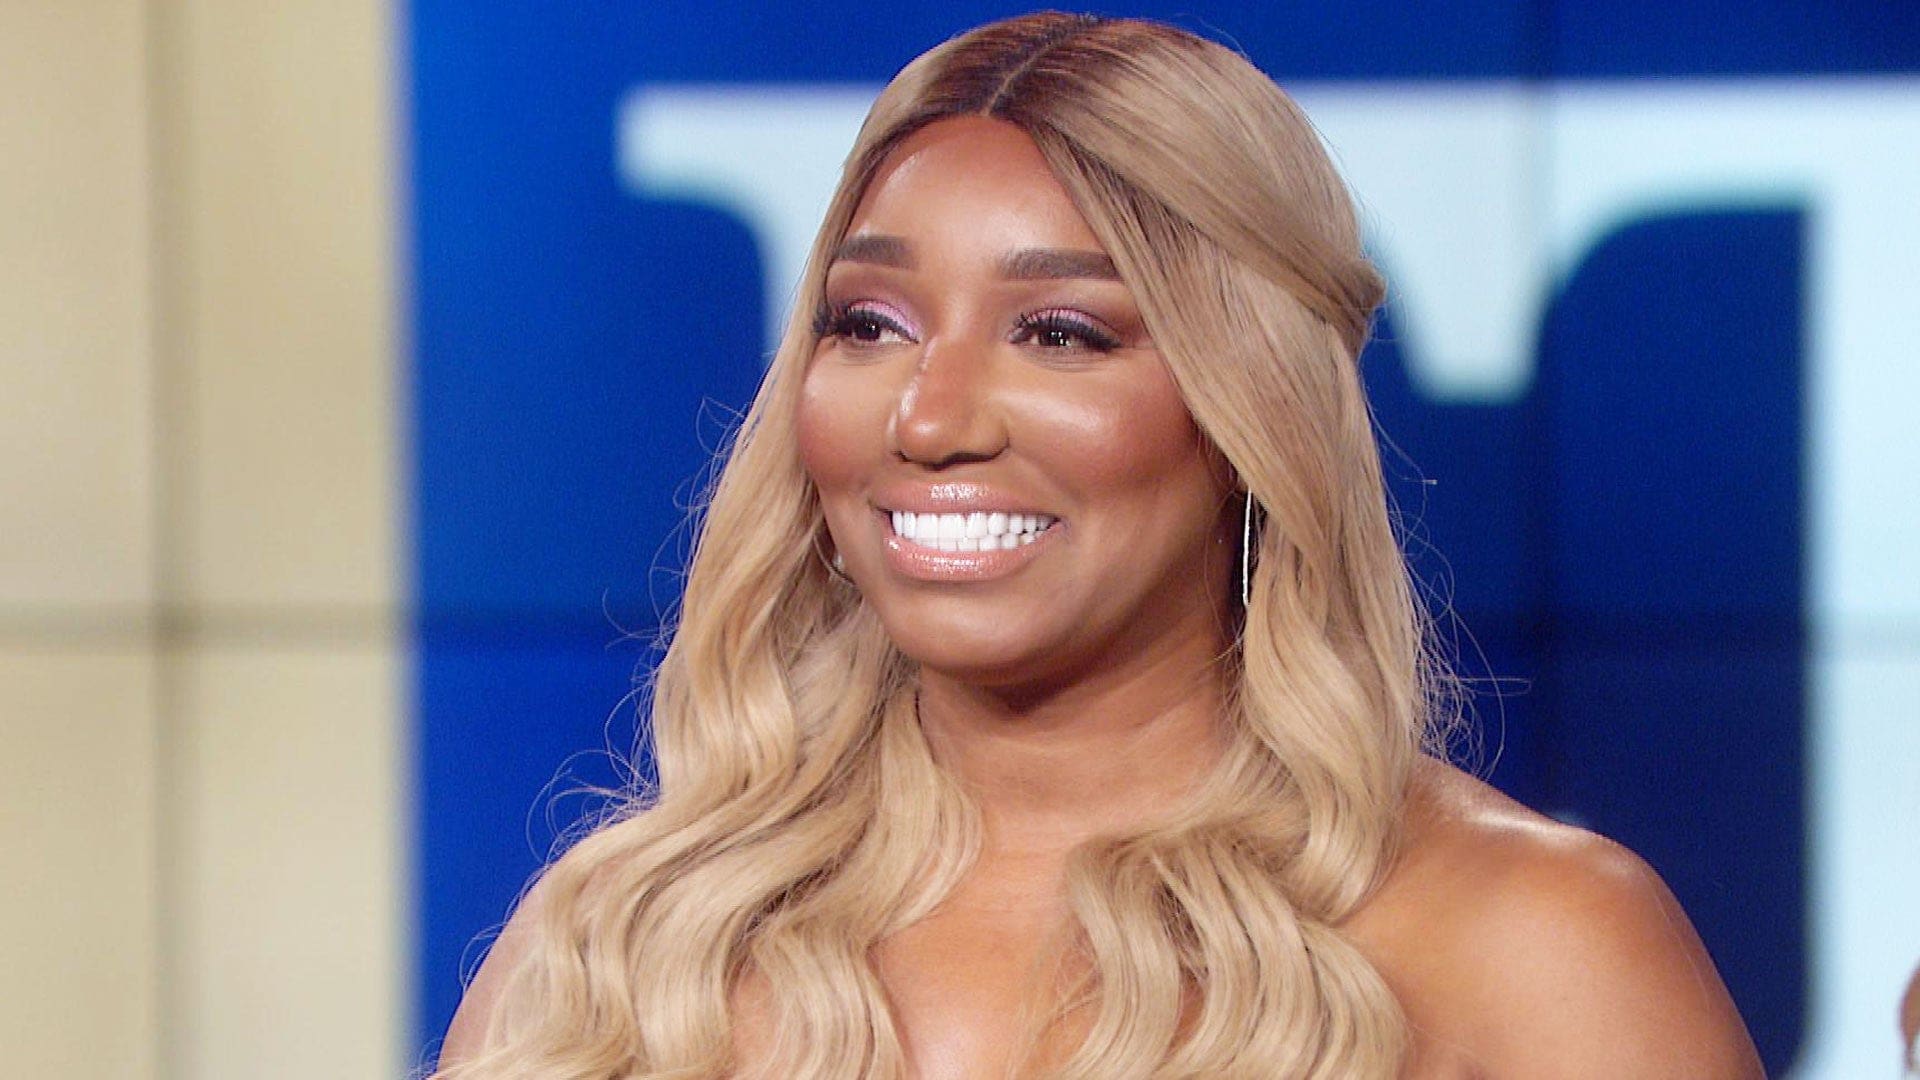 ”nene-leakes-is-serving-a-teenager-attitude-with-the-latest-photo-she-shared”